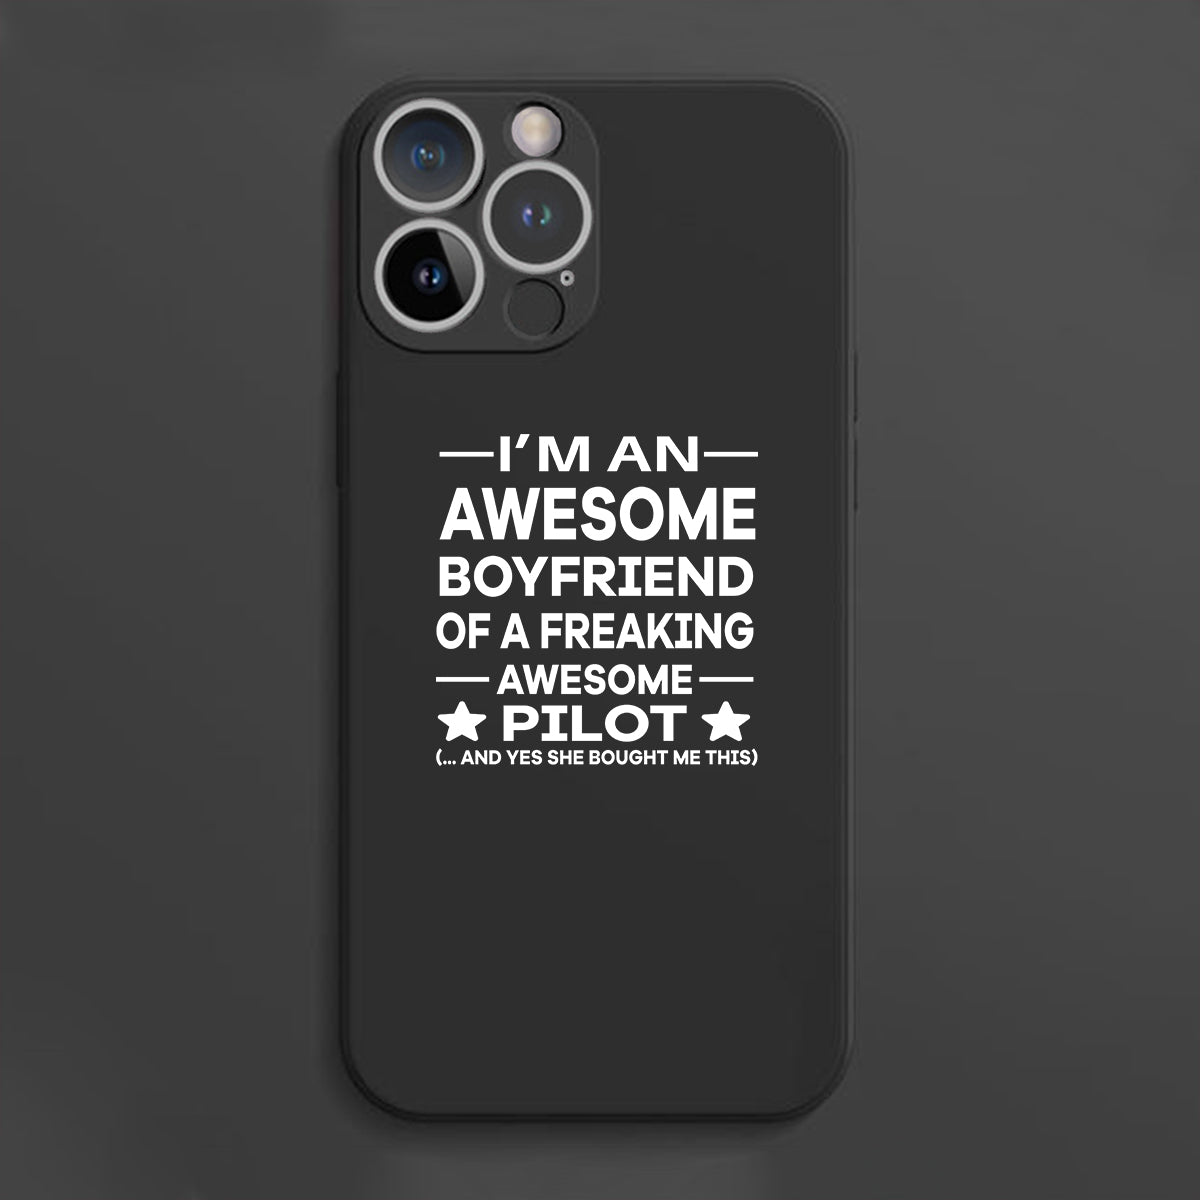 I am an Awesome Boyfriend Designed Soft Silicone iPhone Cases